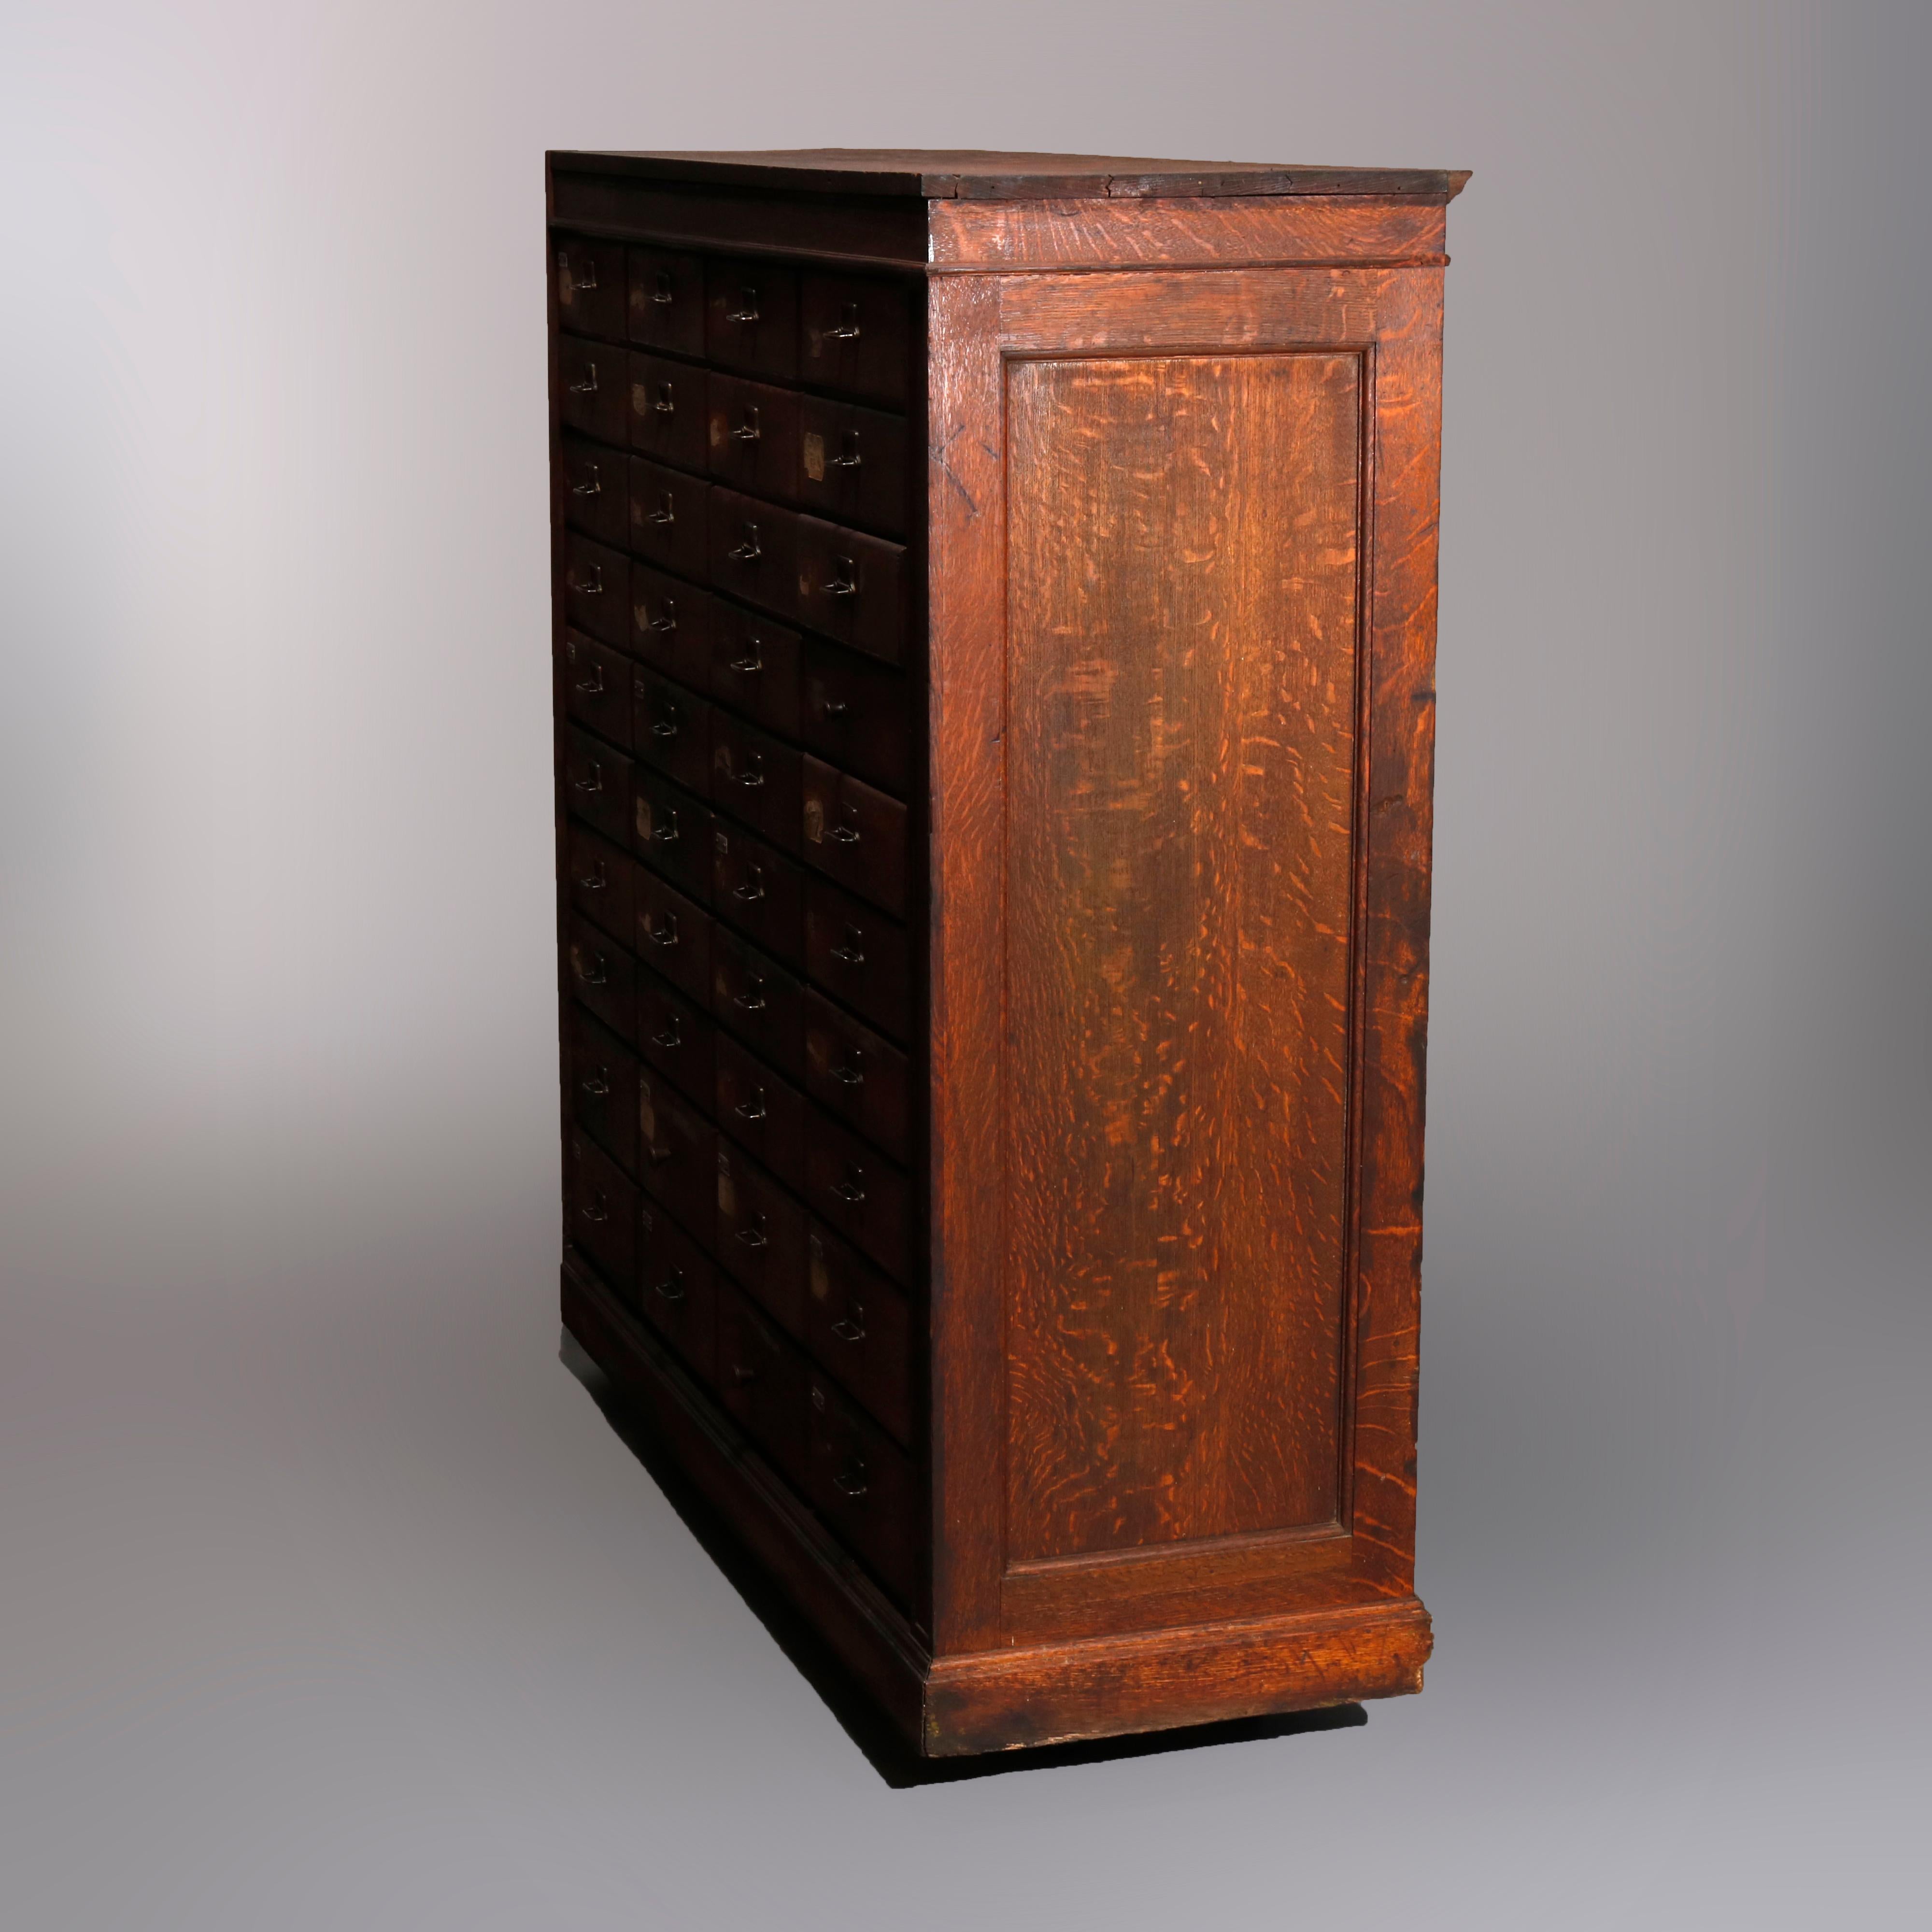 An antique card catalog 40 drawer filing cabinet offers paneled oak case with four drawer columns having ten drawers each (eight narrow drawers over two deeper drawers), c1900

Measures- 77.5